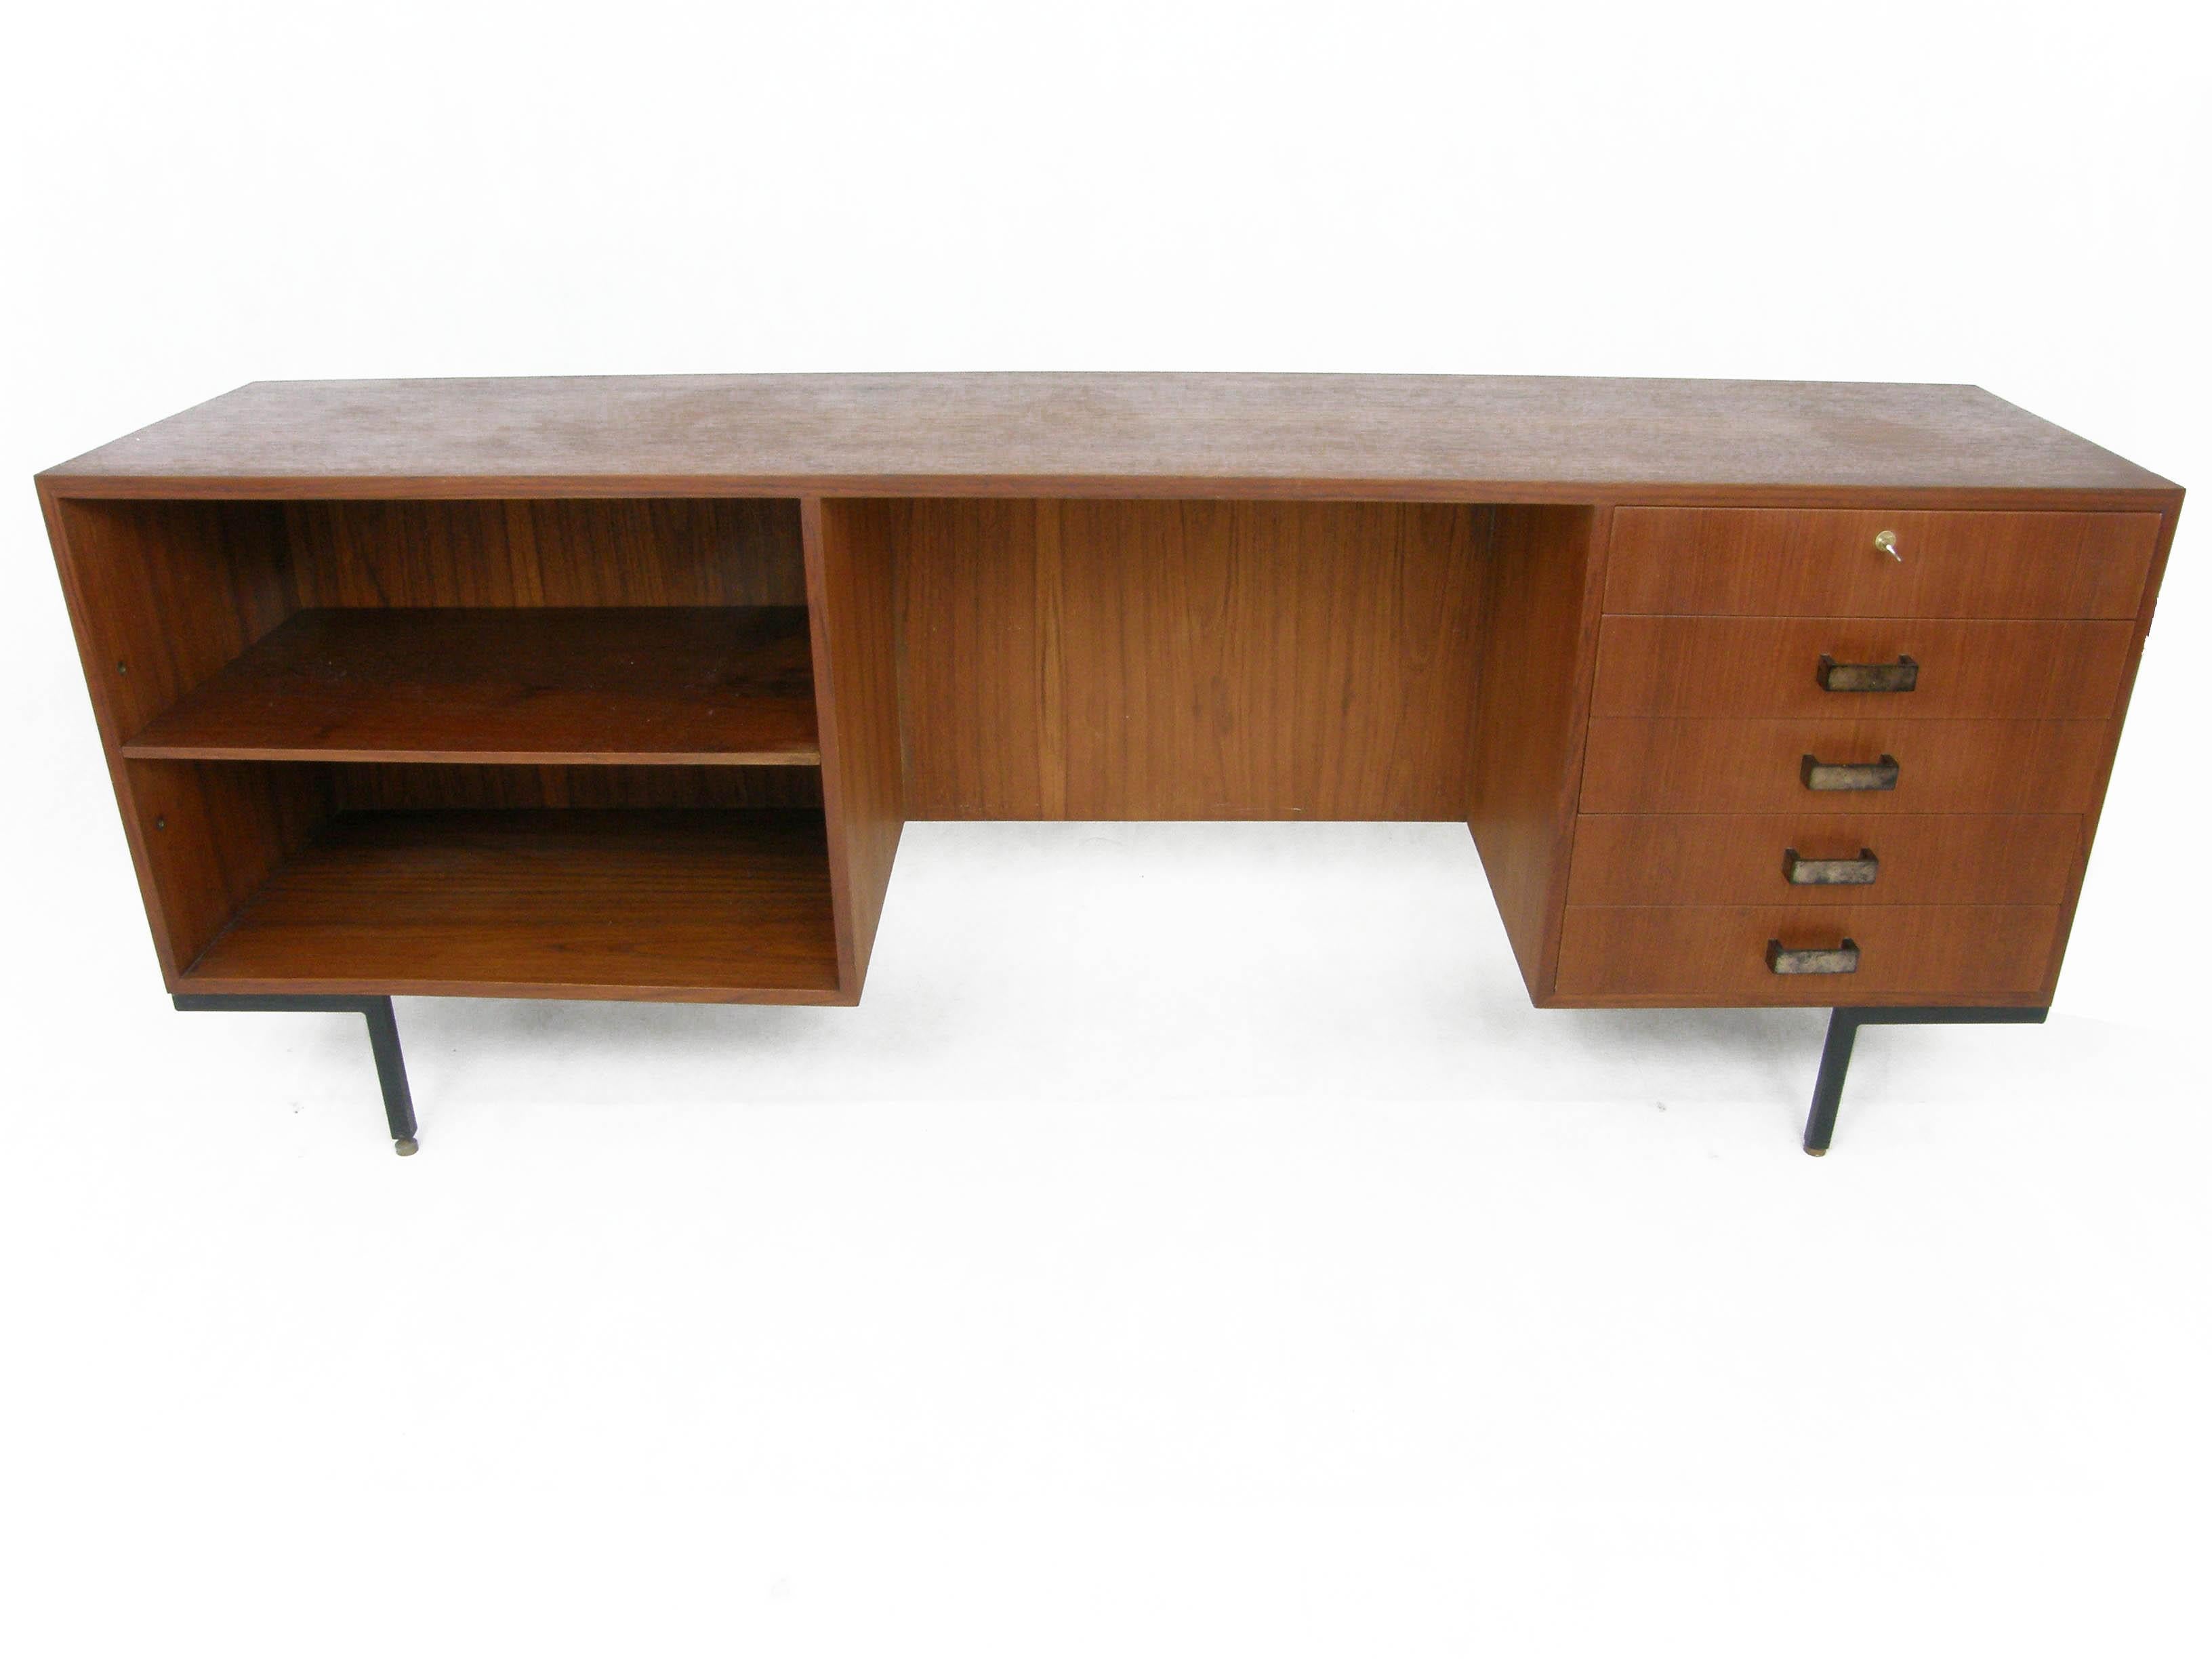 Sideboard designed by Paolo Tilche and produced by Arform, italy '60.

Rare version with central space to accommodate a seat, ideal as an entryway or bedroom cabinet.
Rear finished, also ideal as a room divider or reception cabinet.

Finished in